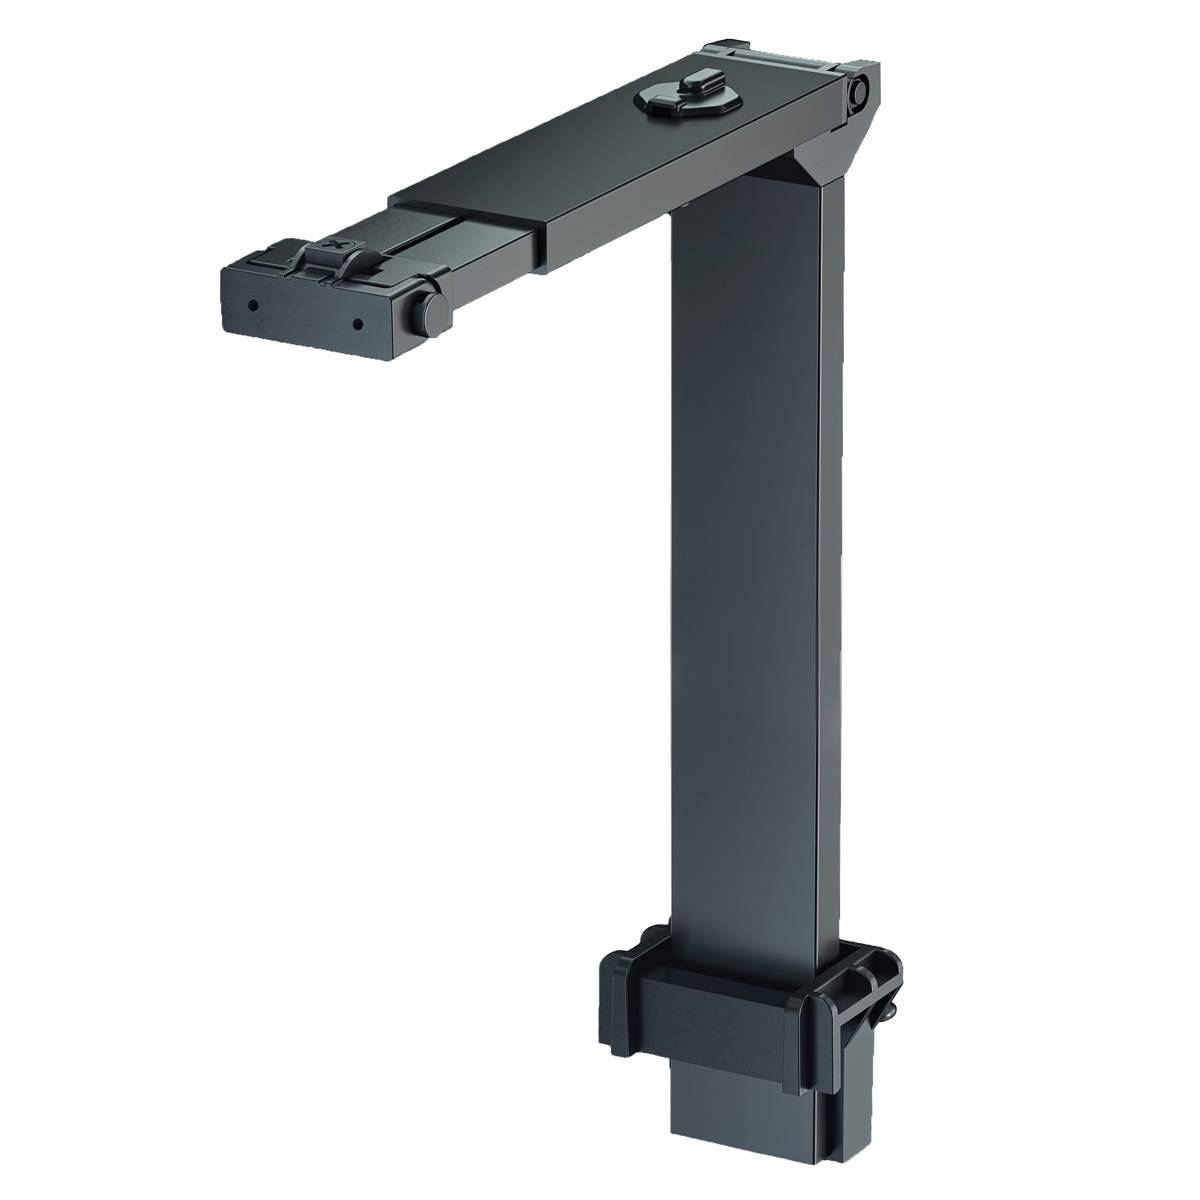 ReefLED 160s Universal Mounting Arm - Red Sea